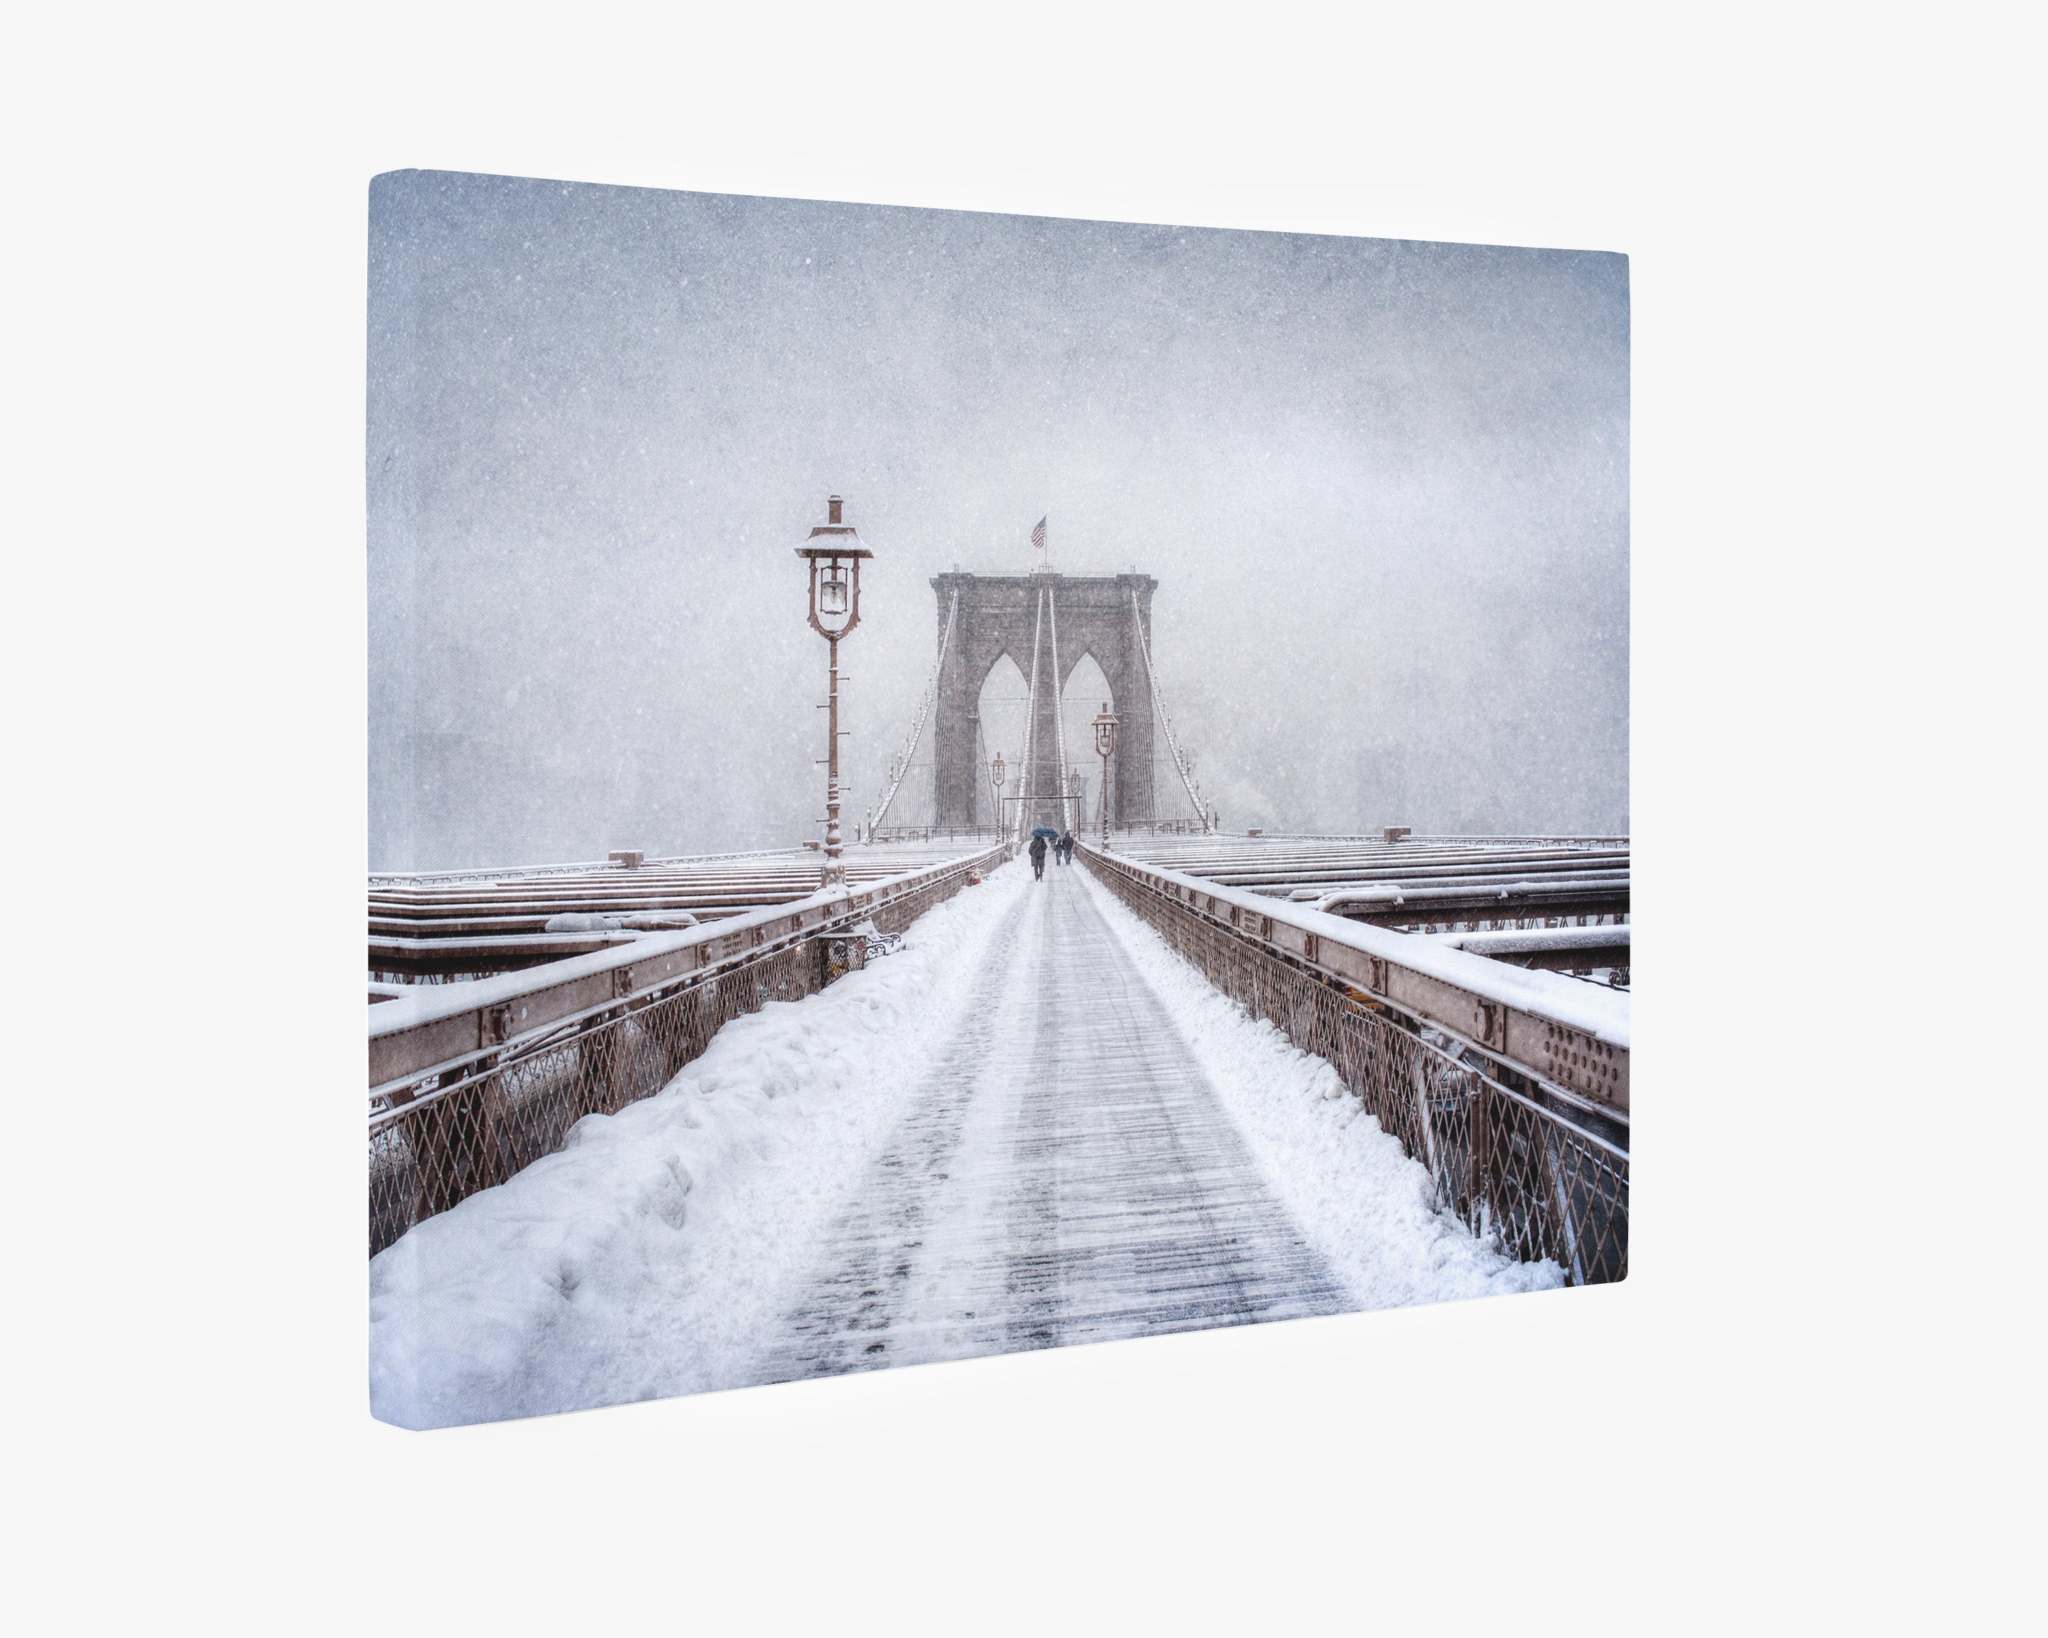 A wintery scene of the Brooklyn Bridge covered in snow, perfect for a Christmas card. The path is lined with a thin, undisturbed layer of snow, and lampposts are visible along the railing. The sky is overcast, and visibility is limited due to the falling snow. This picturesque view is beautifully captured in Offley Green's New York Brooklyn Wall Art, 'Brooklyn Snow'.